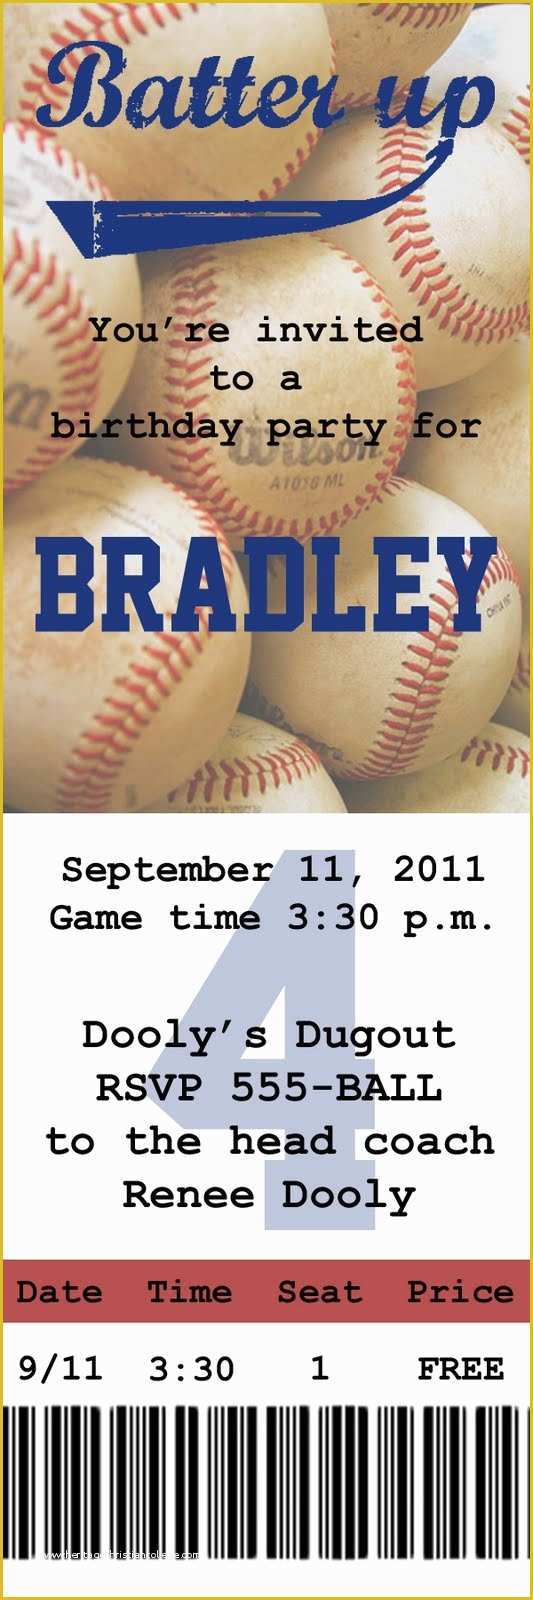 Baseball Ticket Invitation Template Free Of I Love the Idea Of An Invite Like This to A Baseball Game